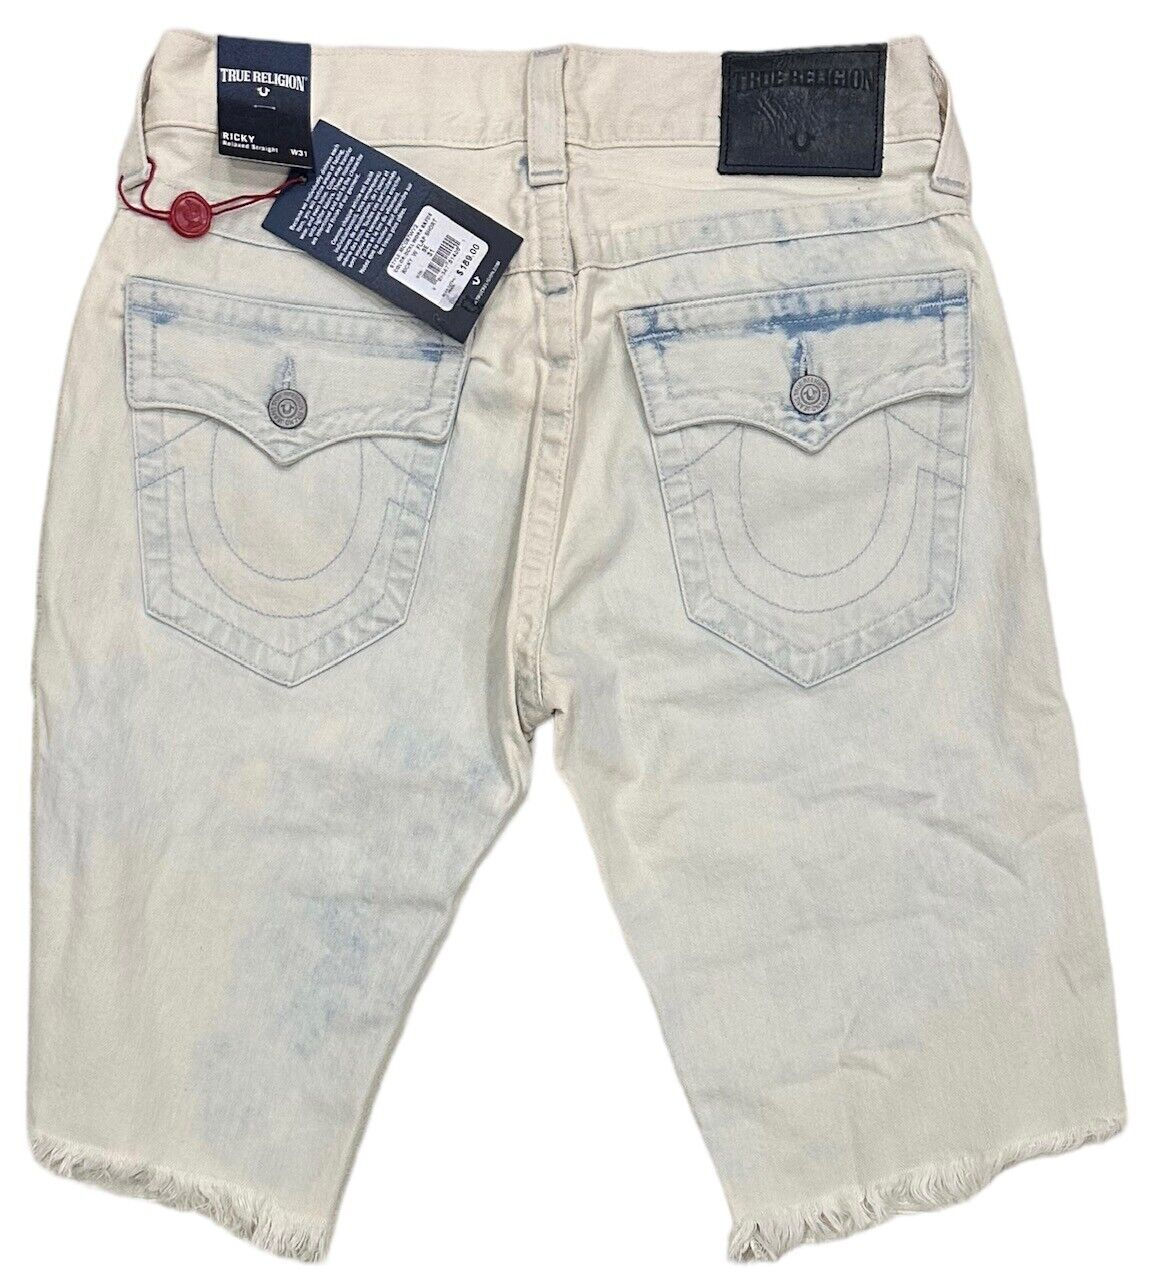 Men's Ricky Bleached Distressed Destruct Ripped Denim Jean Shorts